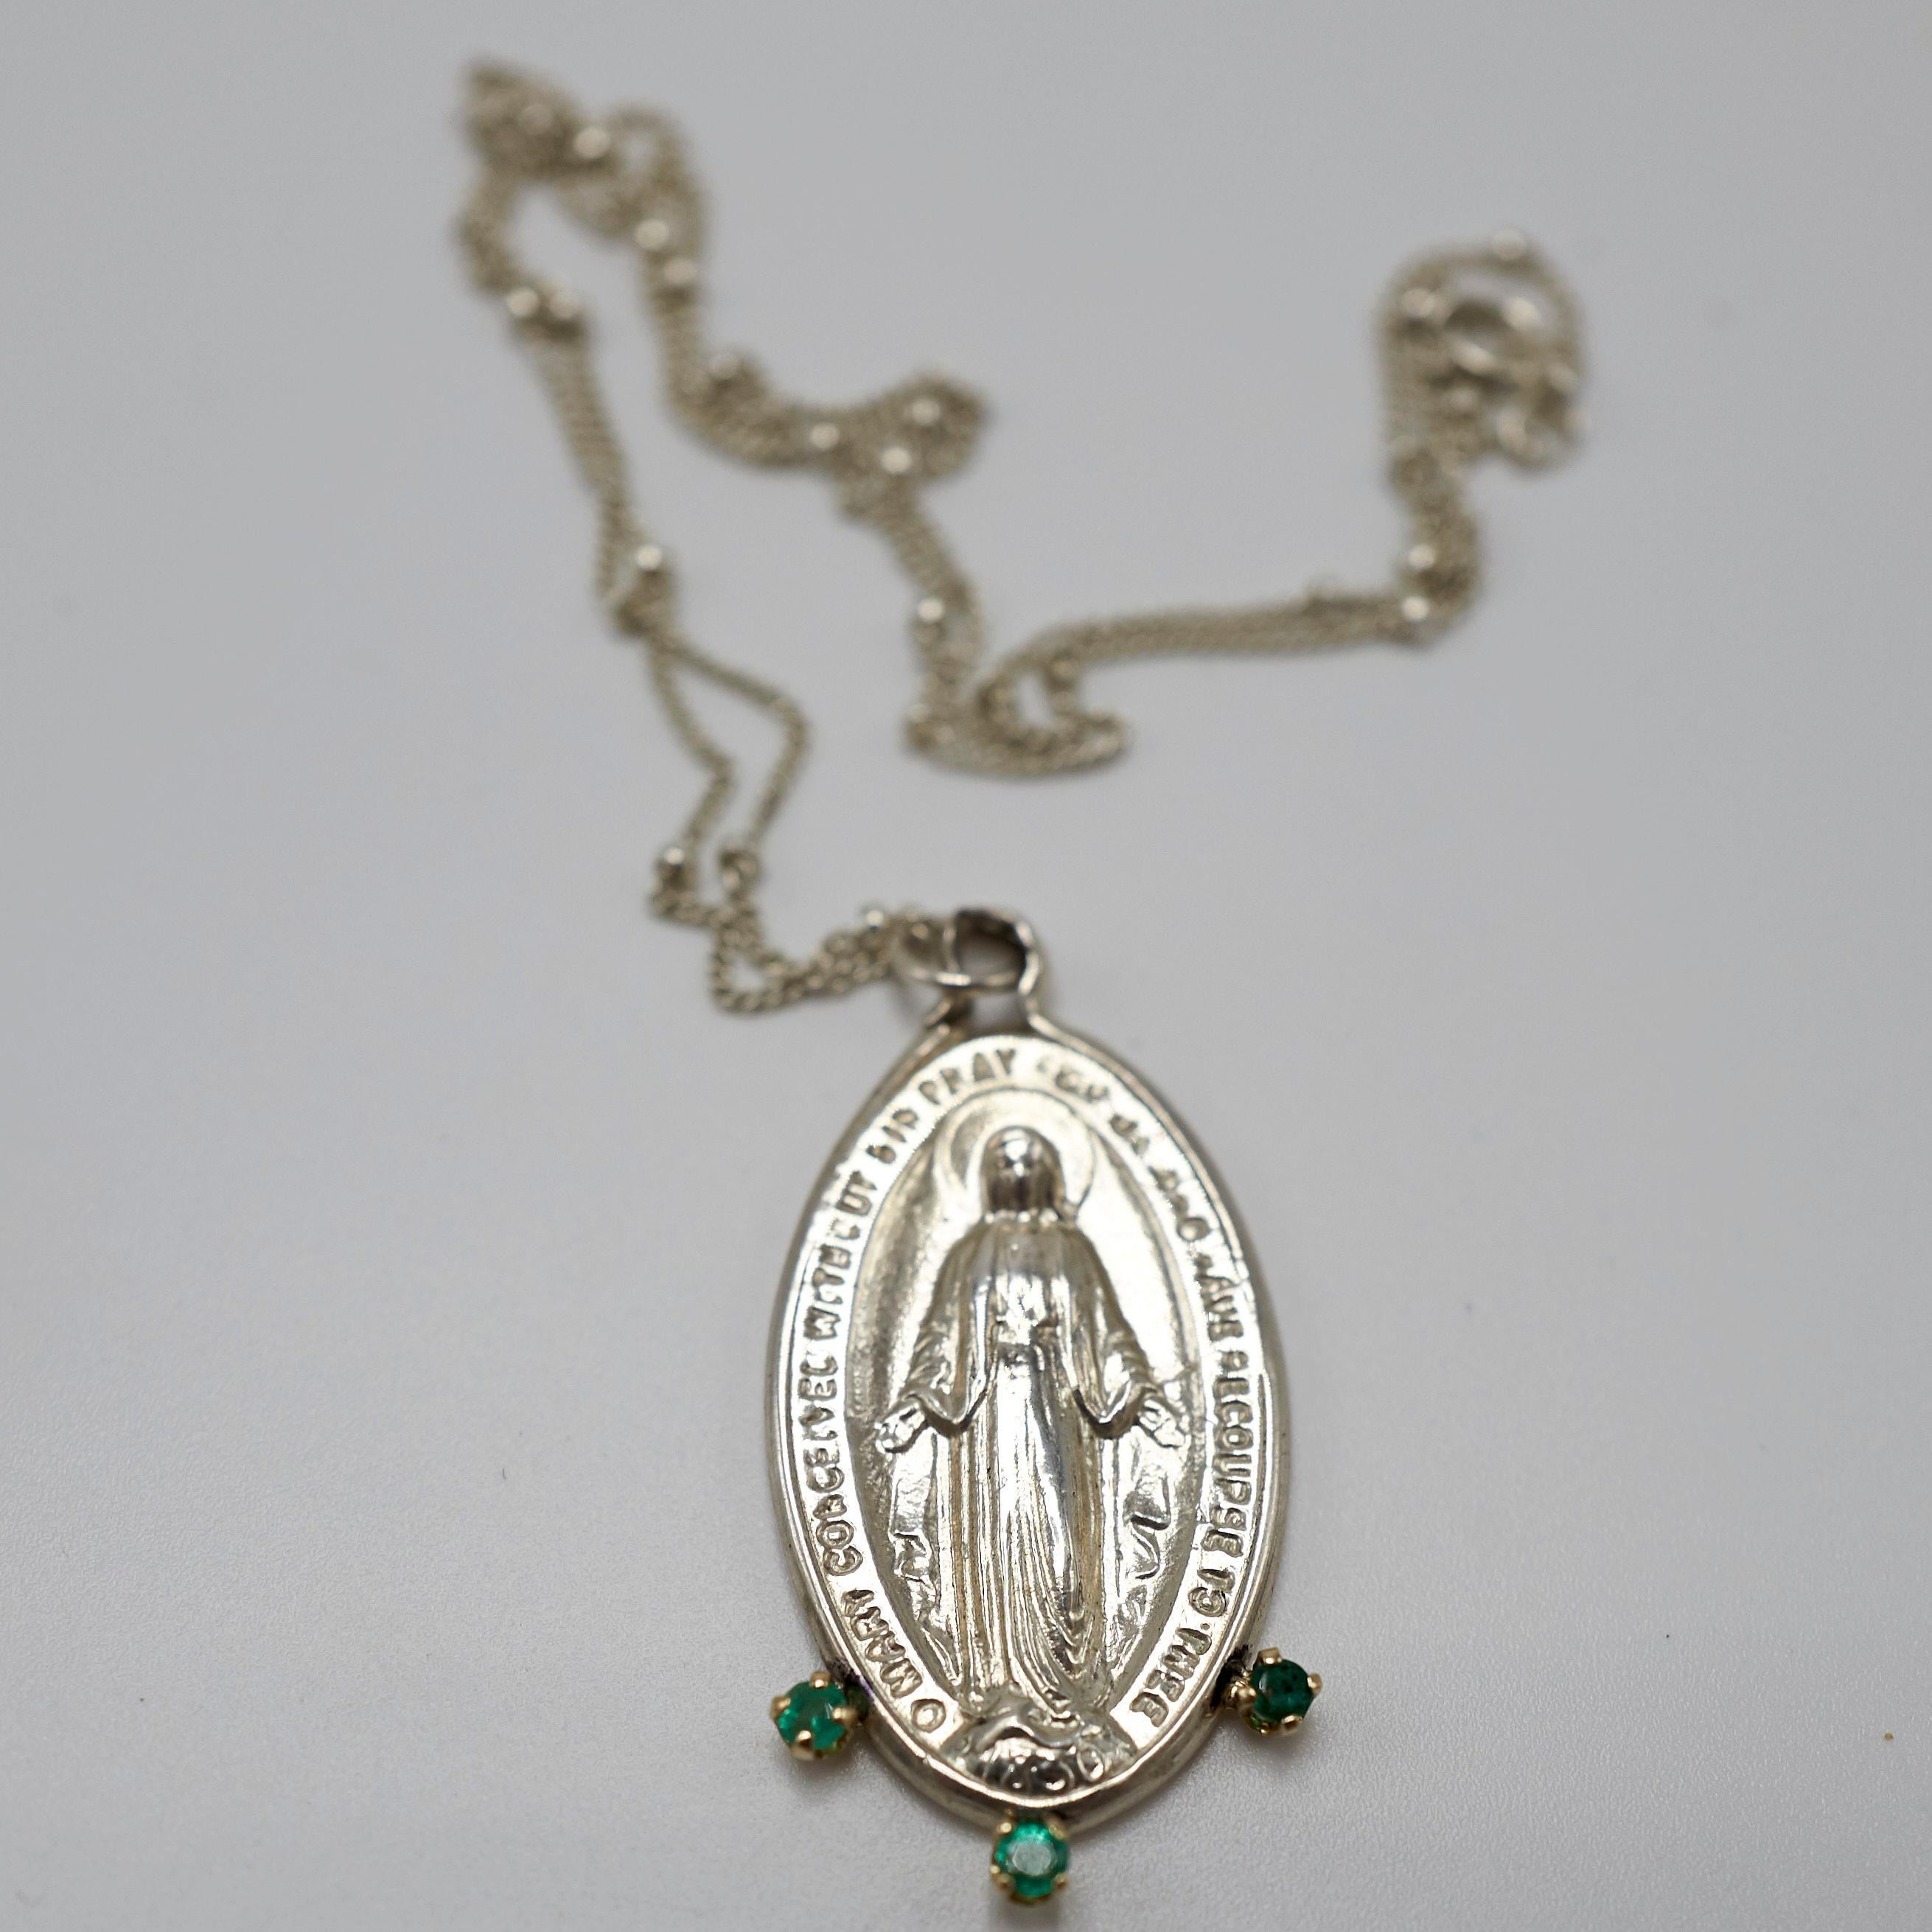 3 Pz Emeralds set in Prongs on  Silver Pendant Spiritual Necklace Virgin Mary Medal Oval J Dauphin

Symbols or medals can become a powerful tool in our arsenal for the spiritual. 
Since ancient times spiritual pendants, religious medals has been